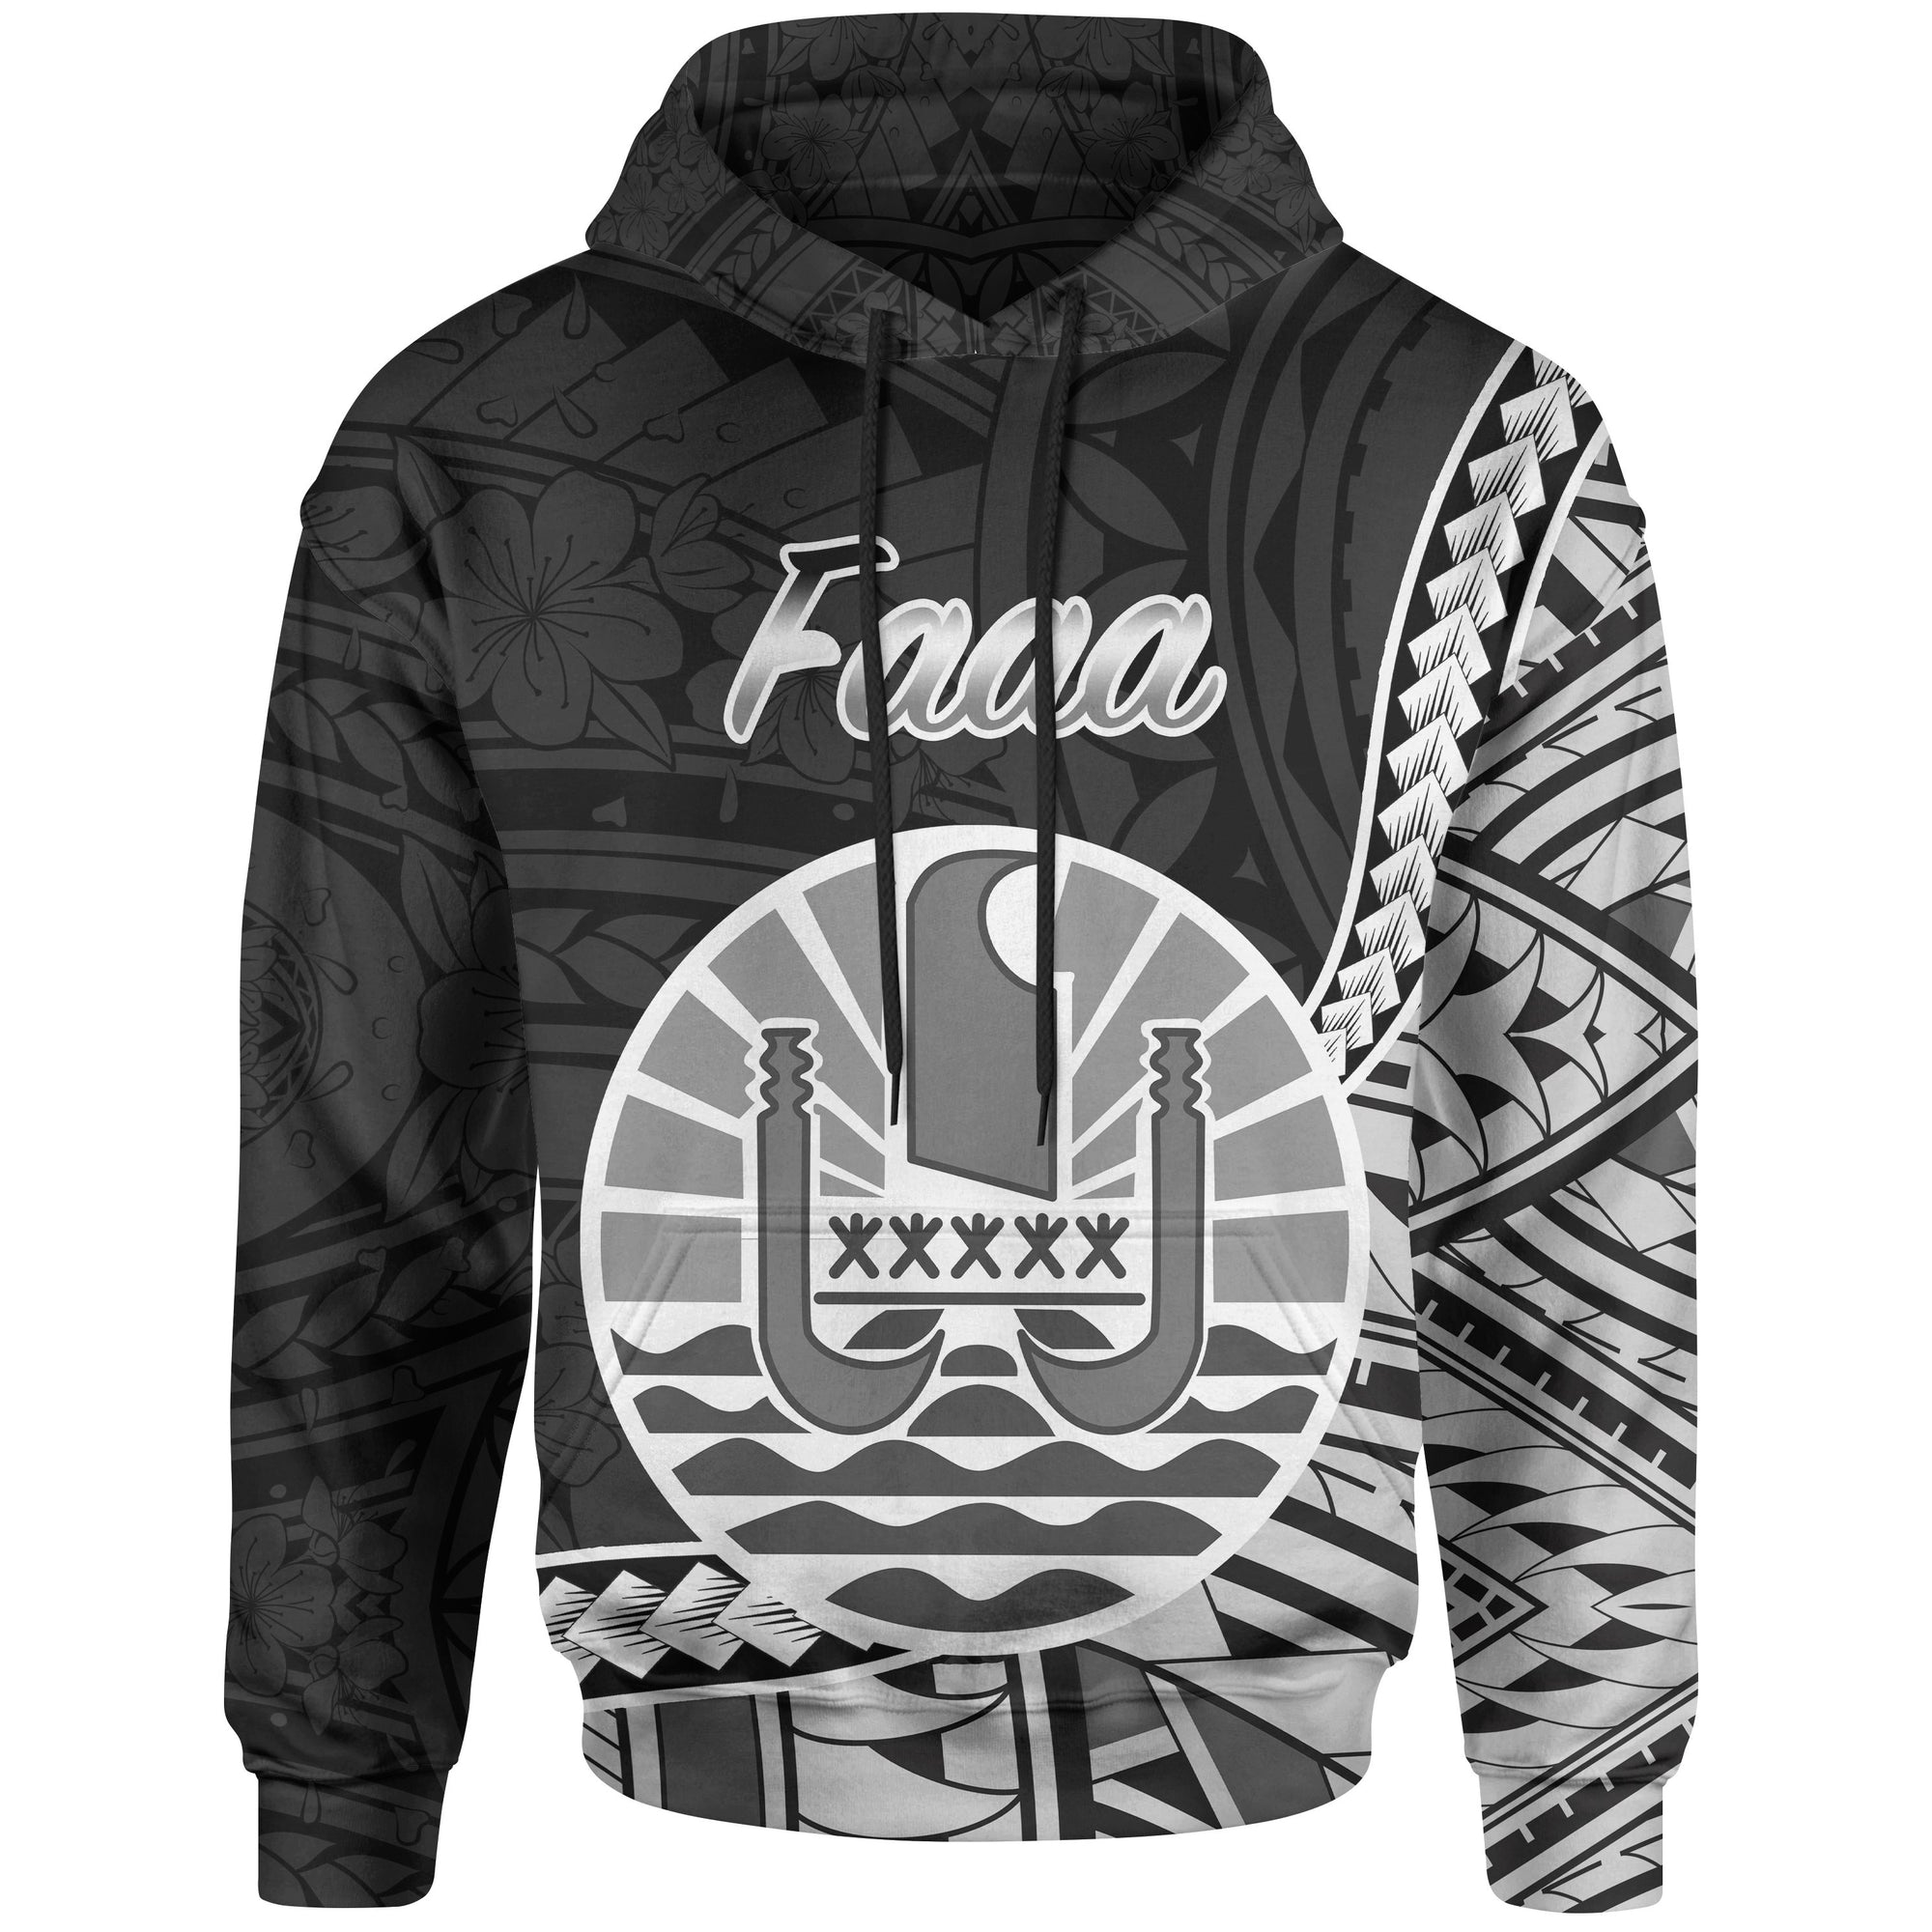 French Polynesia Hoodie Faaa Seal of French Polynesia Polynesian Patterns Unisex Black - Polynesian Pride